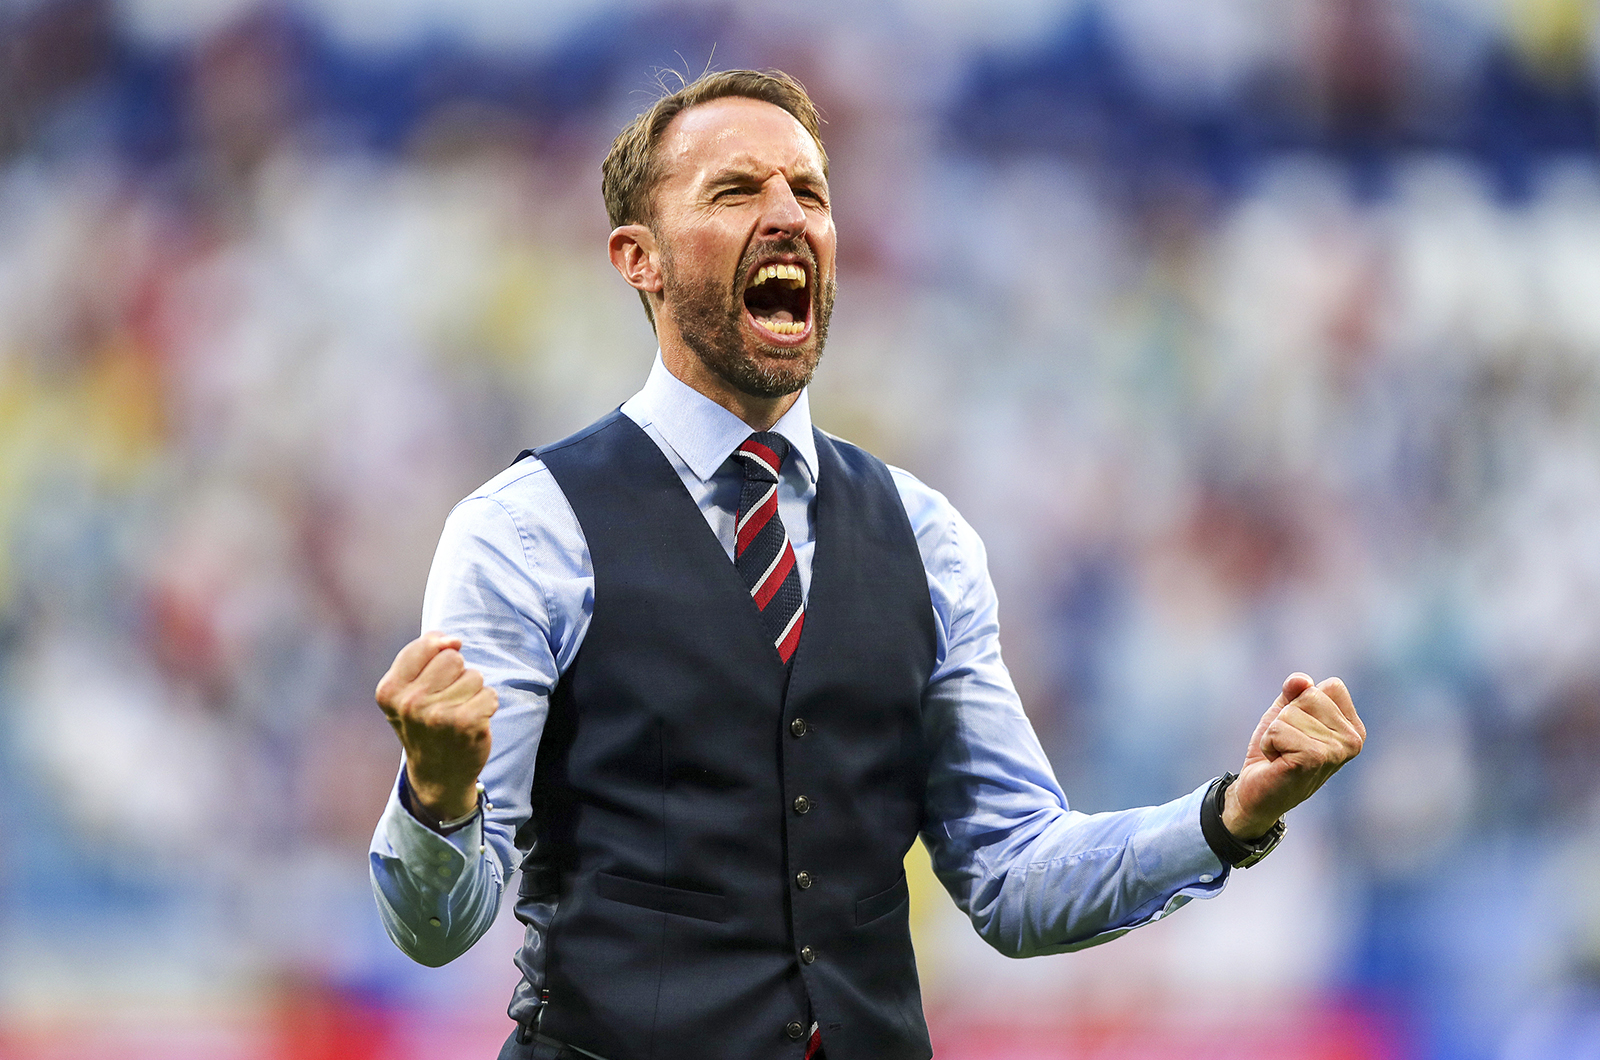 Gareth Southgate England manager celebrates at Russia World Cup